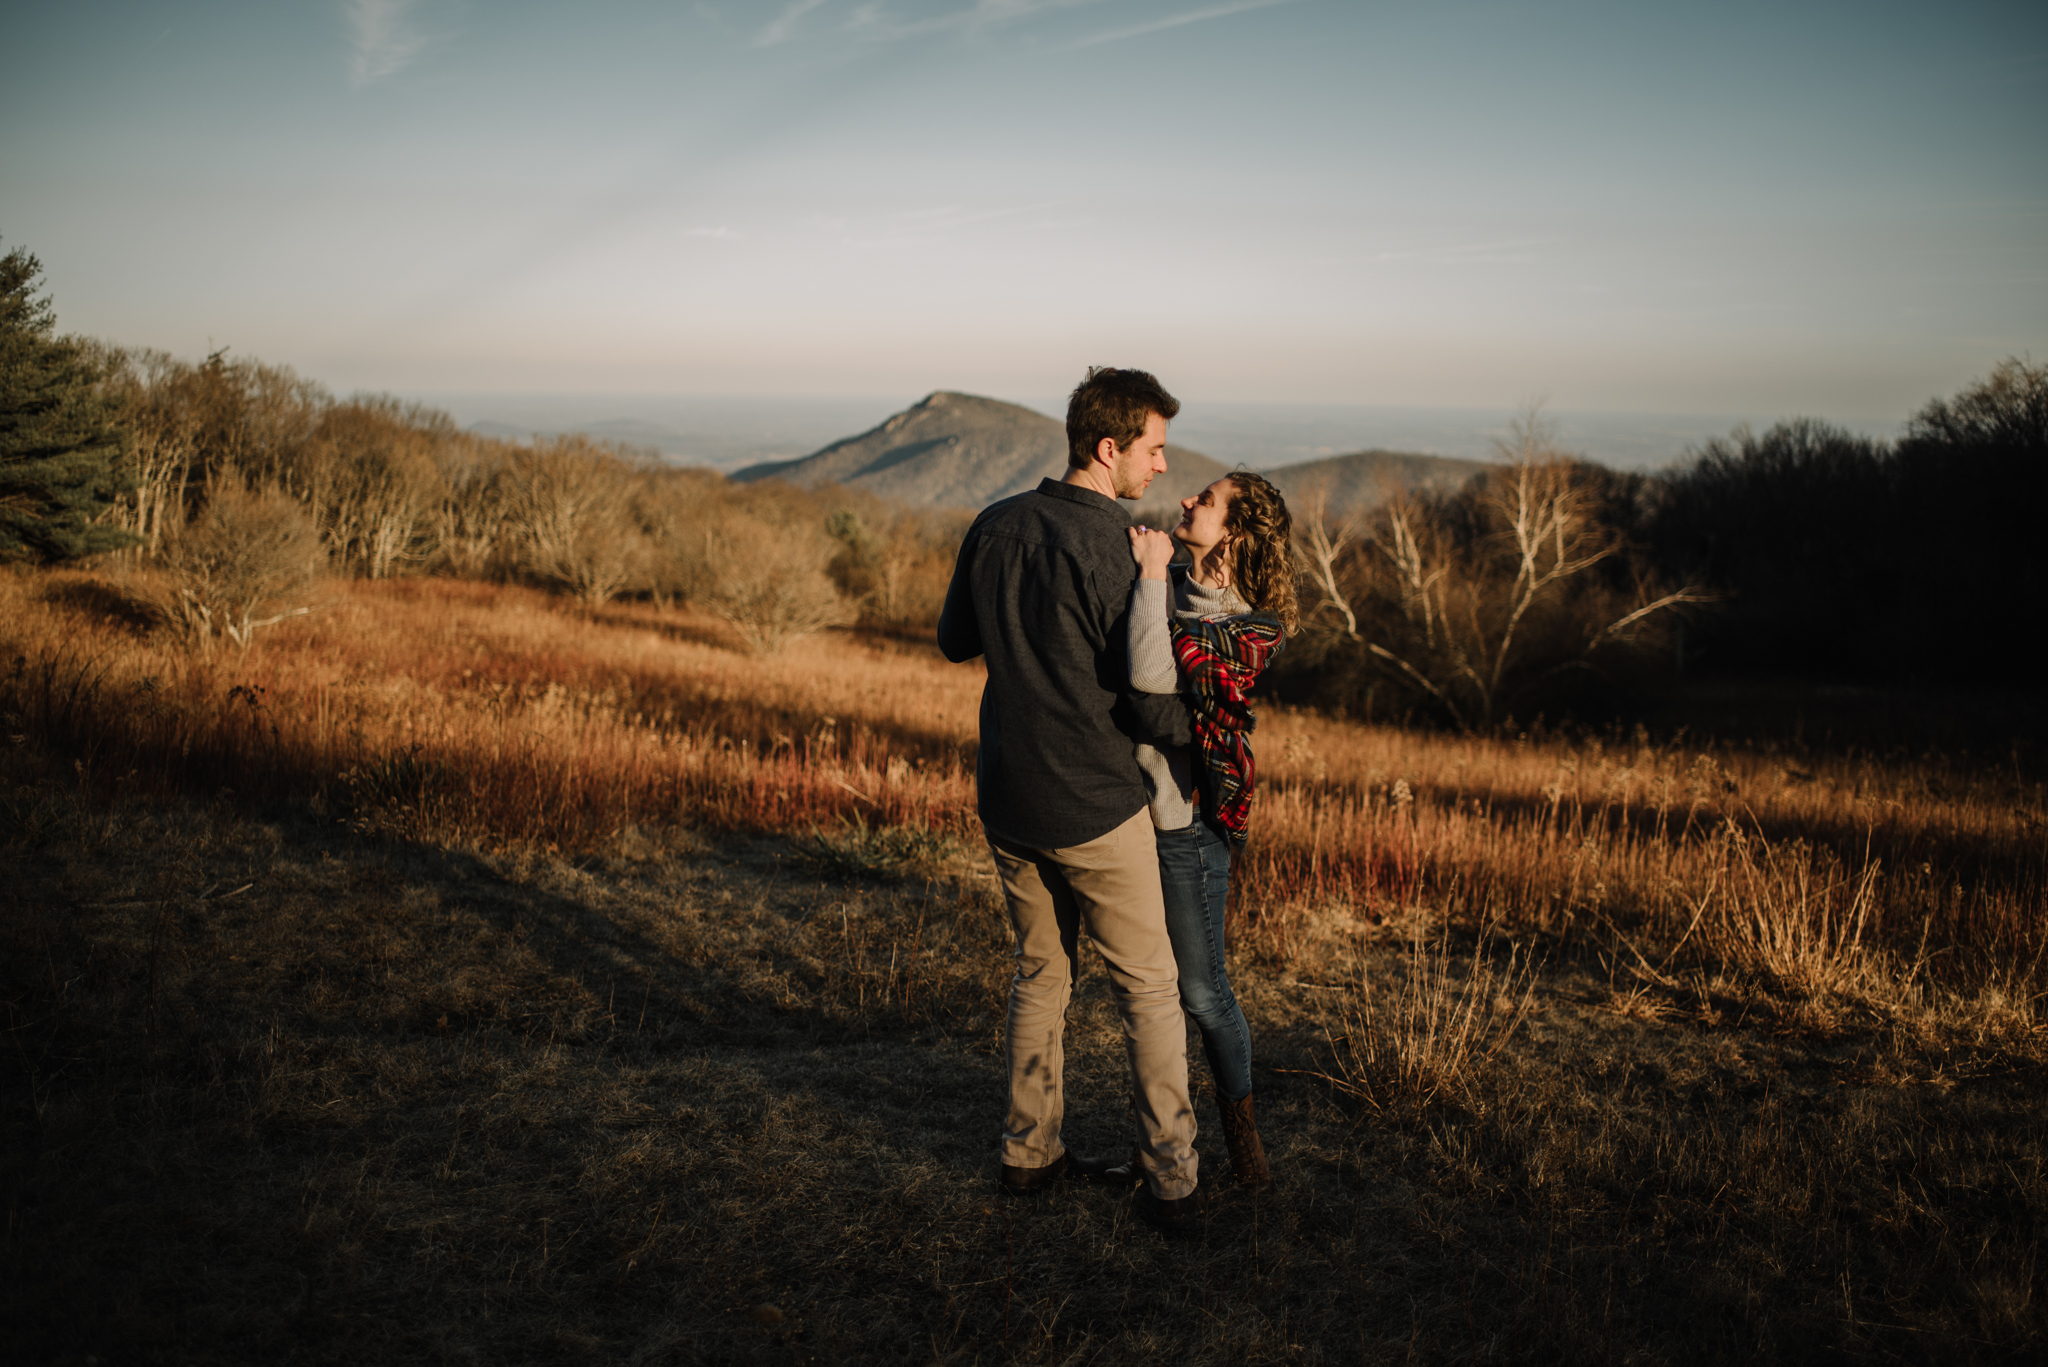 Alli and Mitchell - Shenandoah National Park Adventure Winter Engagement Session on Skyline Drive - White Sails Creative Elopement Photography_36.JPG